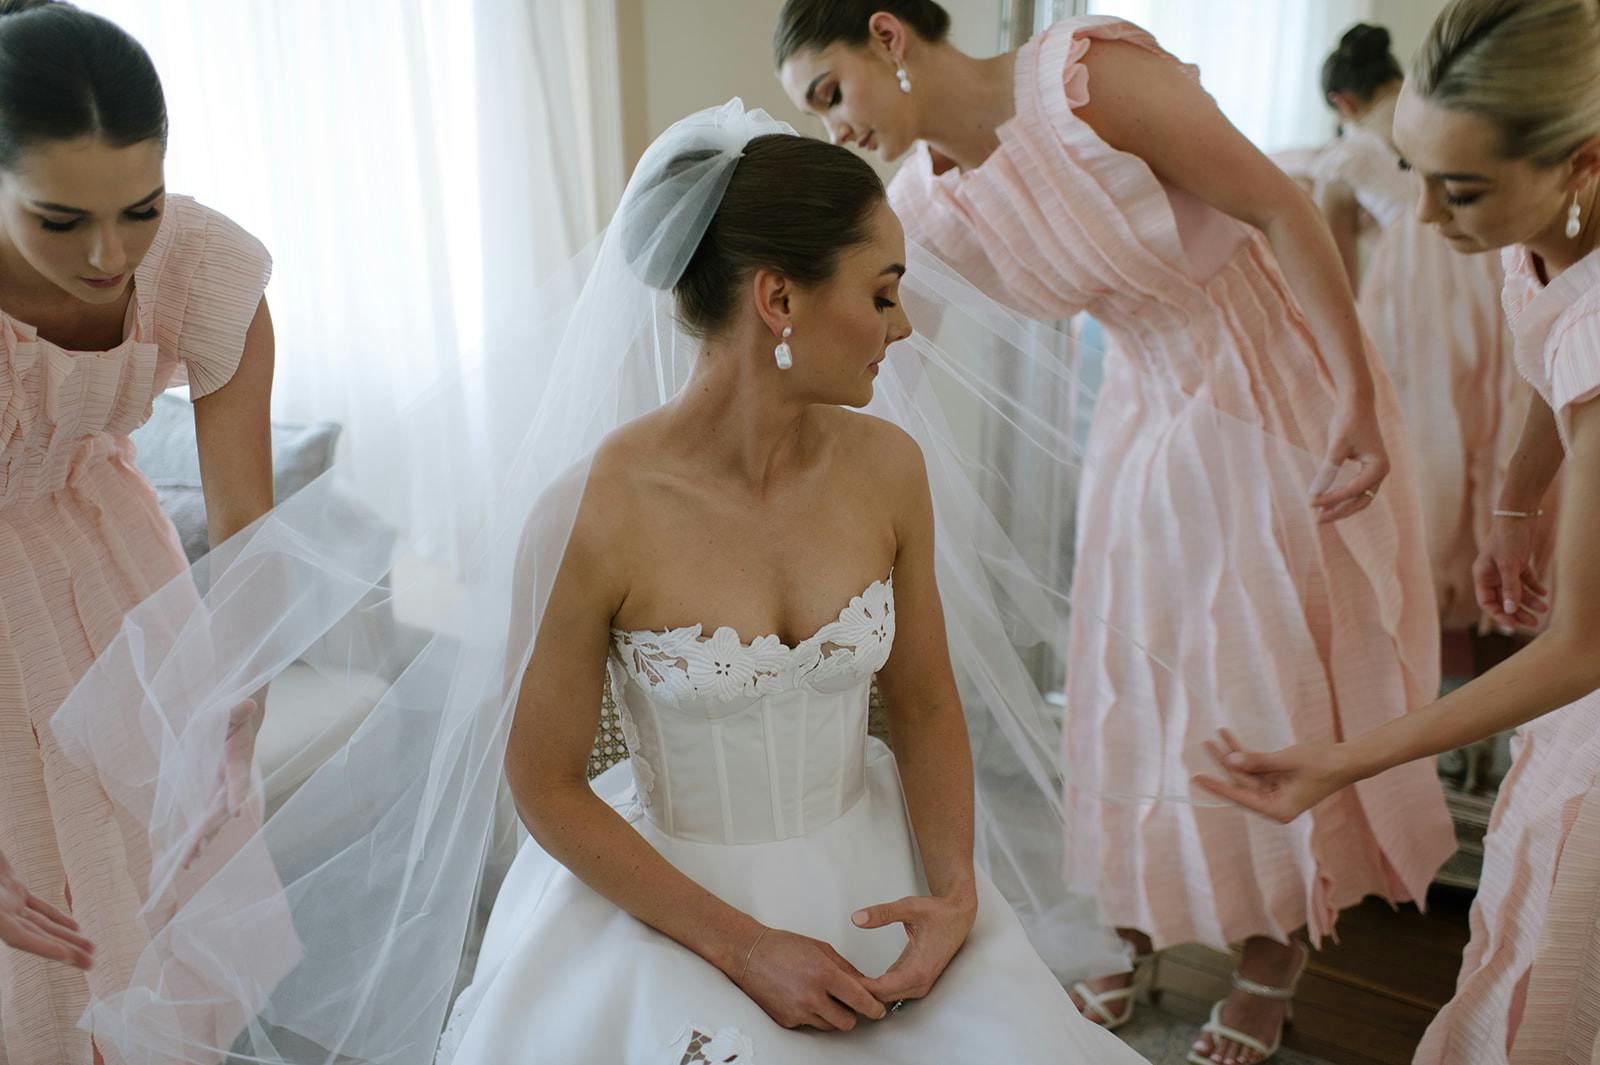 A bride, sitting down, is adjusting her white strapless wedding gown while wearing a veil. Three bridesmaids in matching light pink dresses assist her, each focusing on different parts of her veil and dress. The room has bright natural light coming through the window.